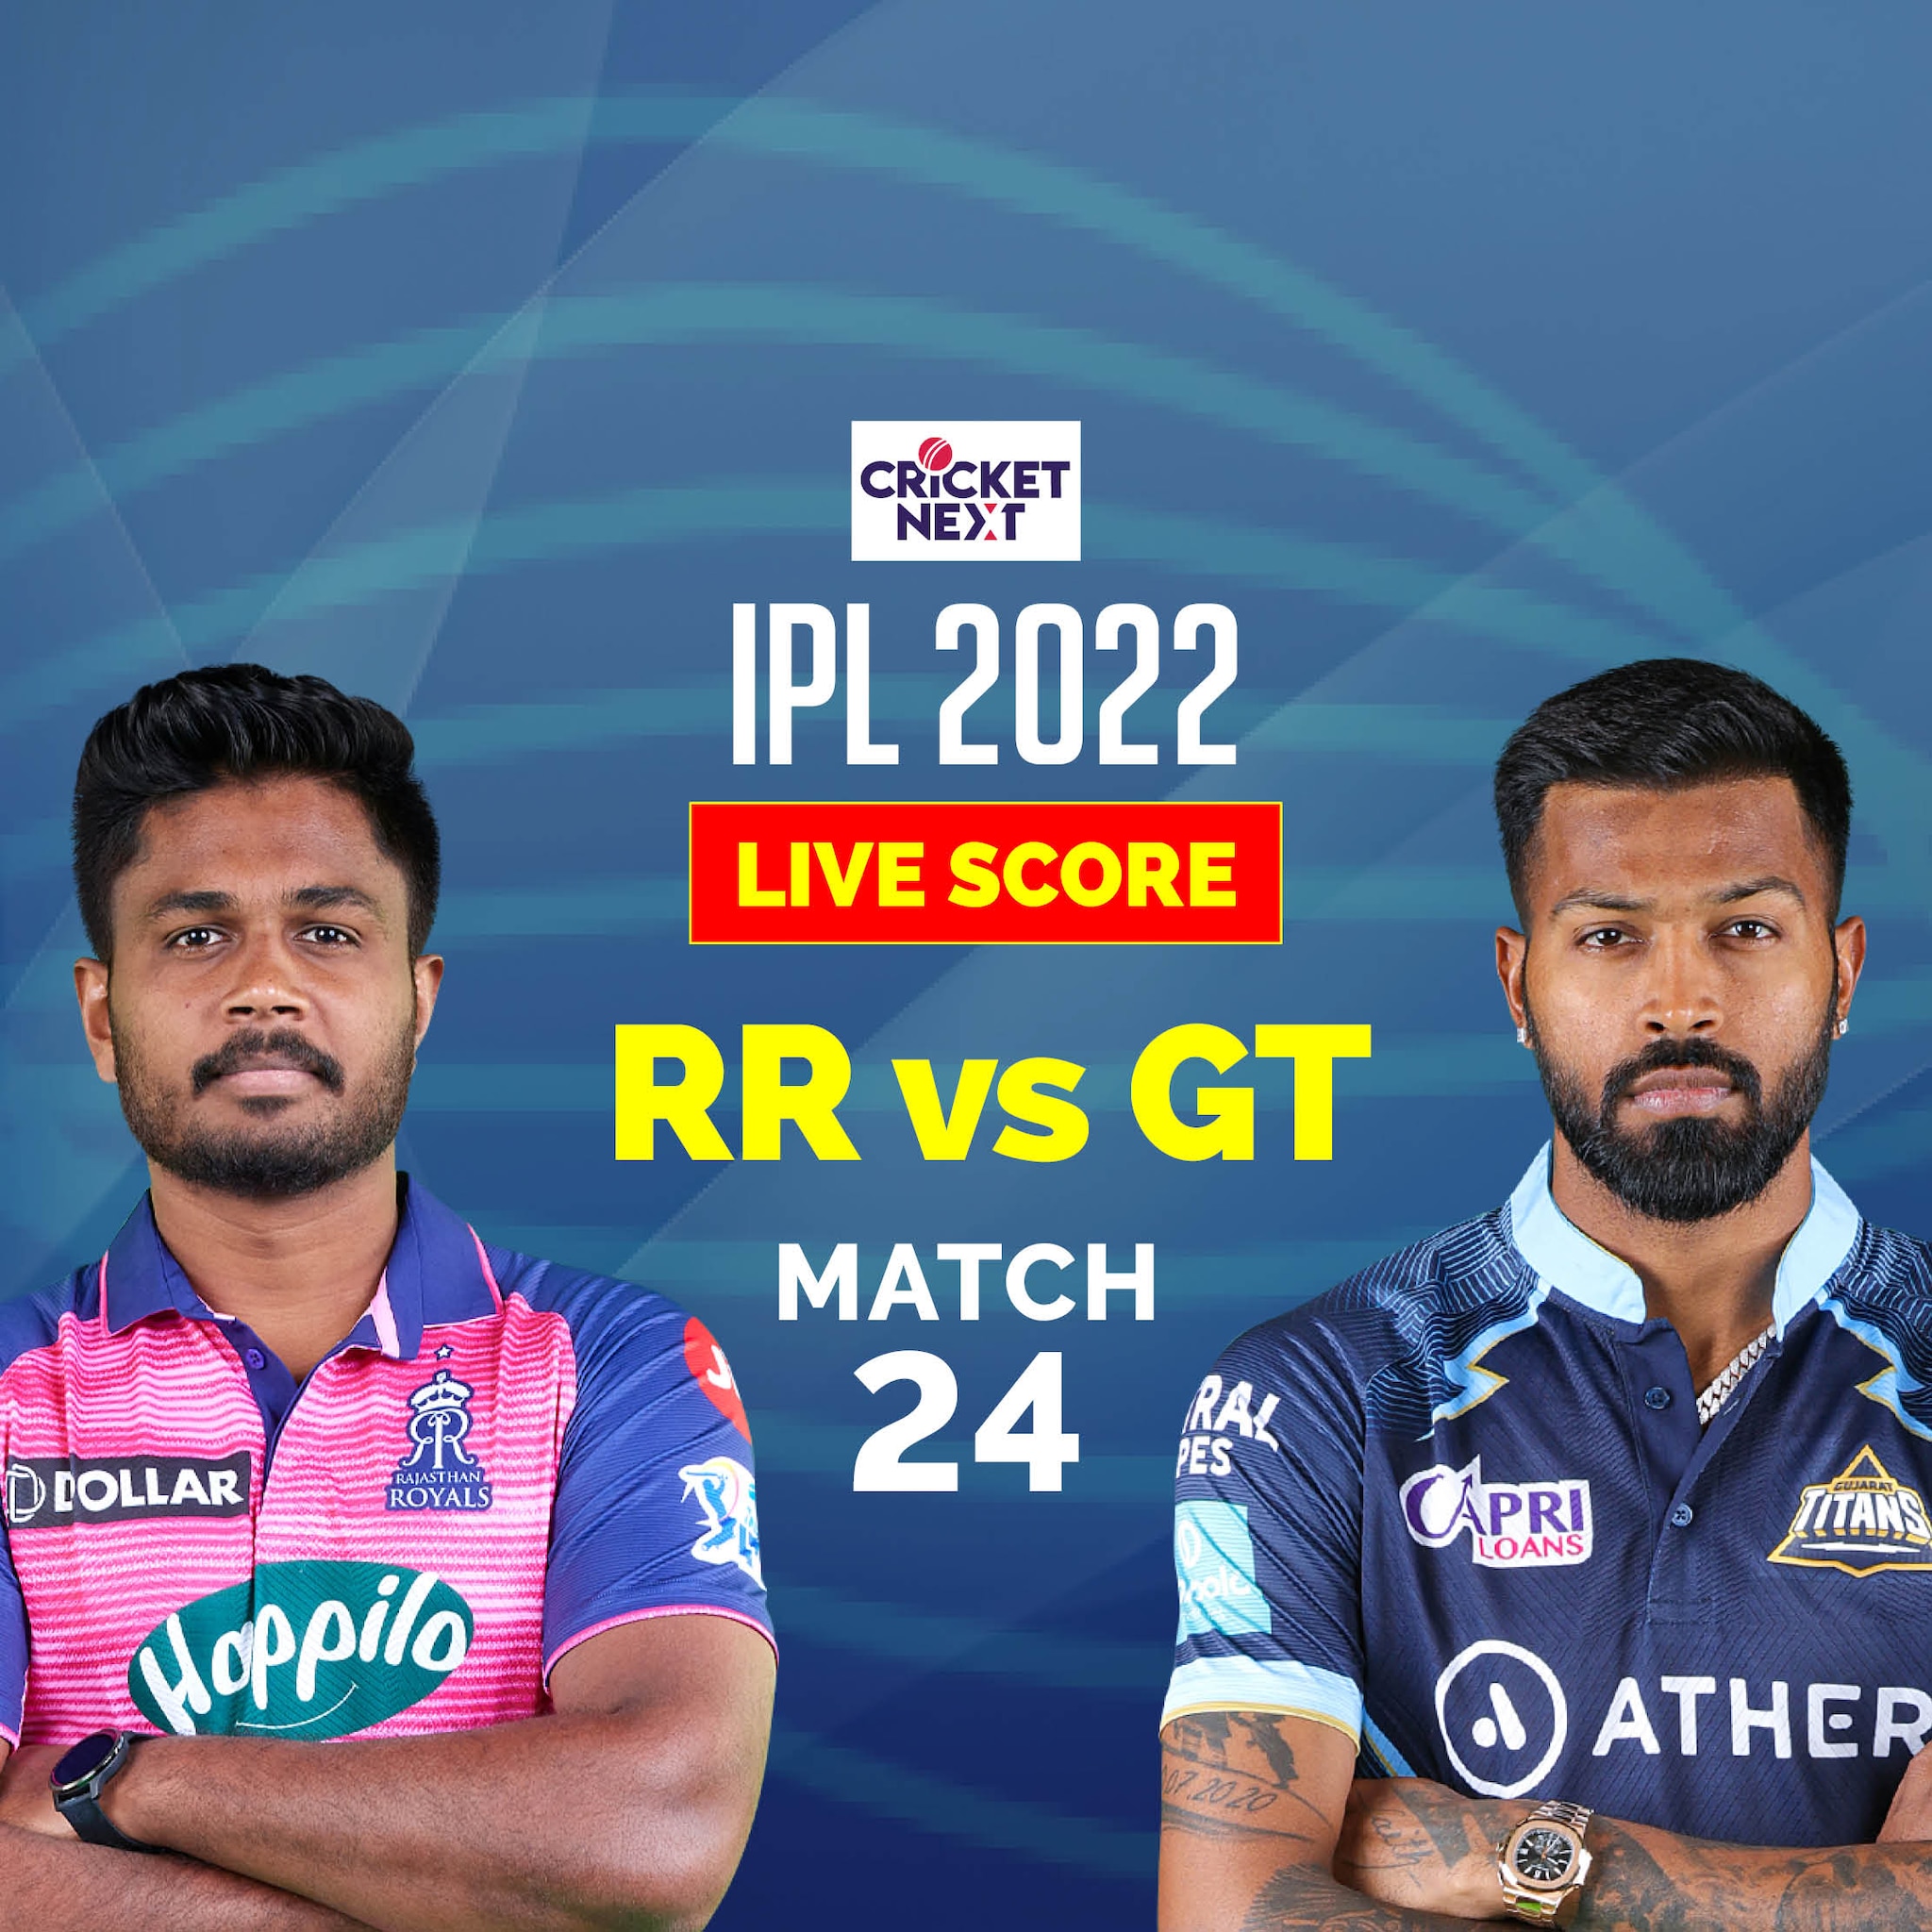 RR vs GT IPL 2022 Highlights Buttlers Fifty Goes in Vain as Gujarat Titans Beat Rajasthan Royals by 37 Runs